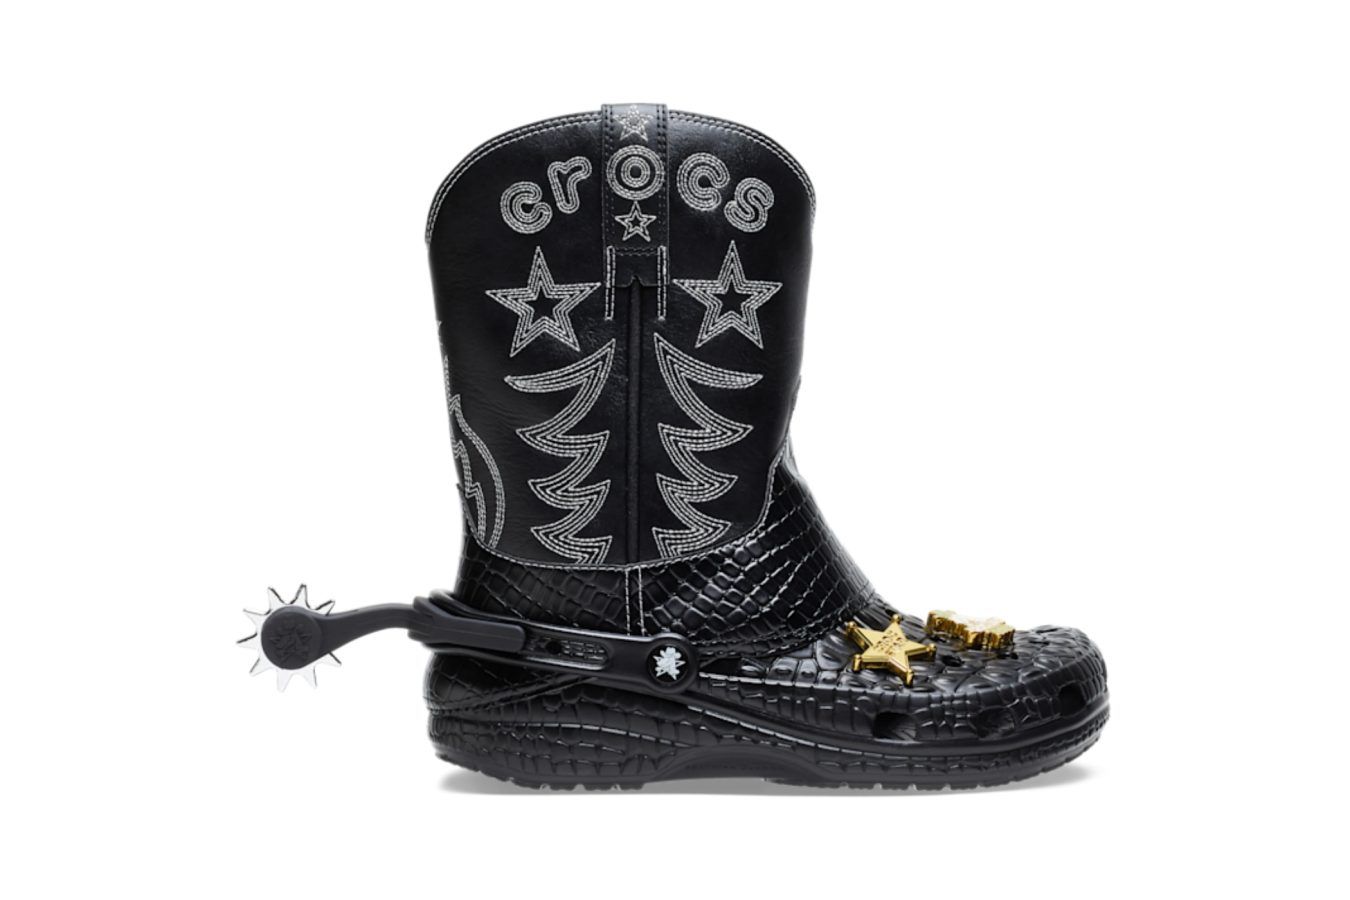 Giddy-up! Crocs' Cowboy Boot drops just in time for Halloween